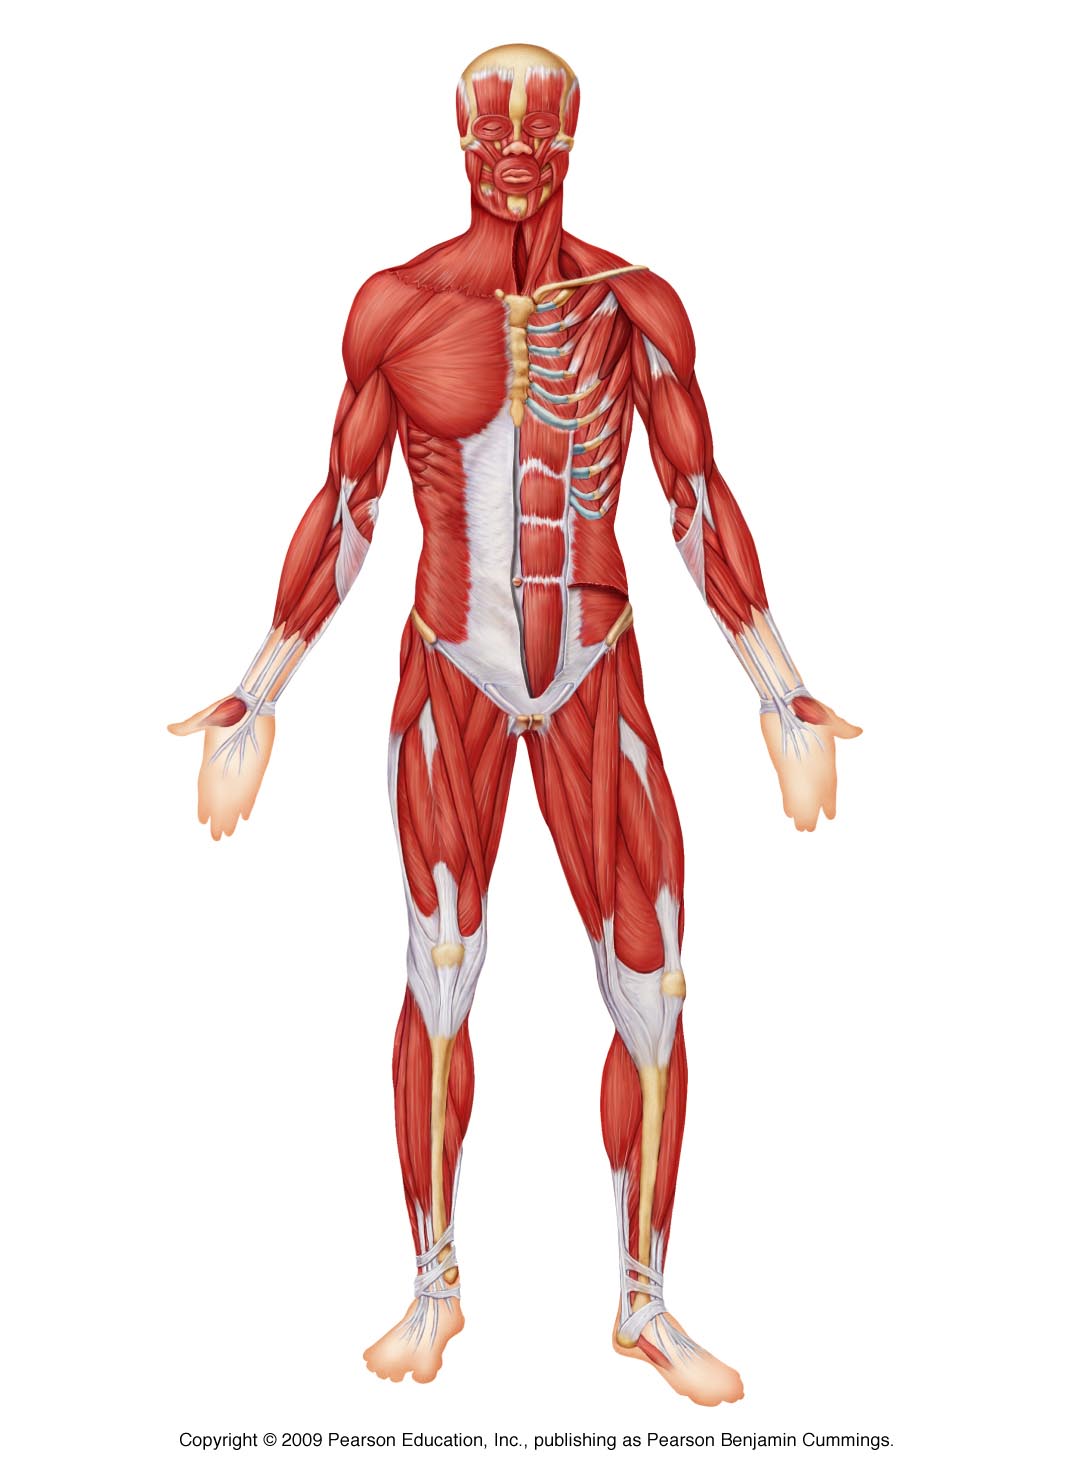 muscles of the body unlabeled - ModernHeal.com